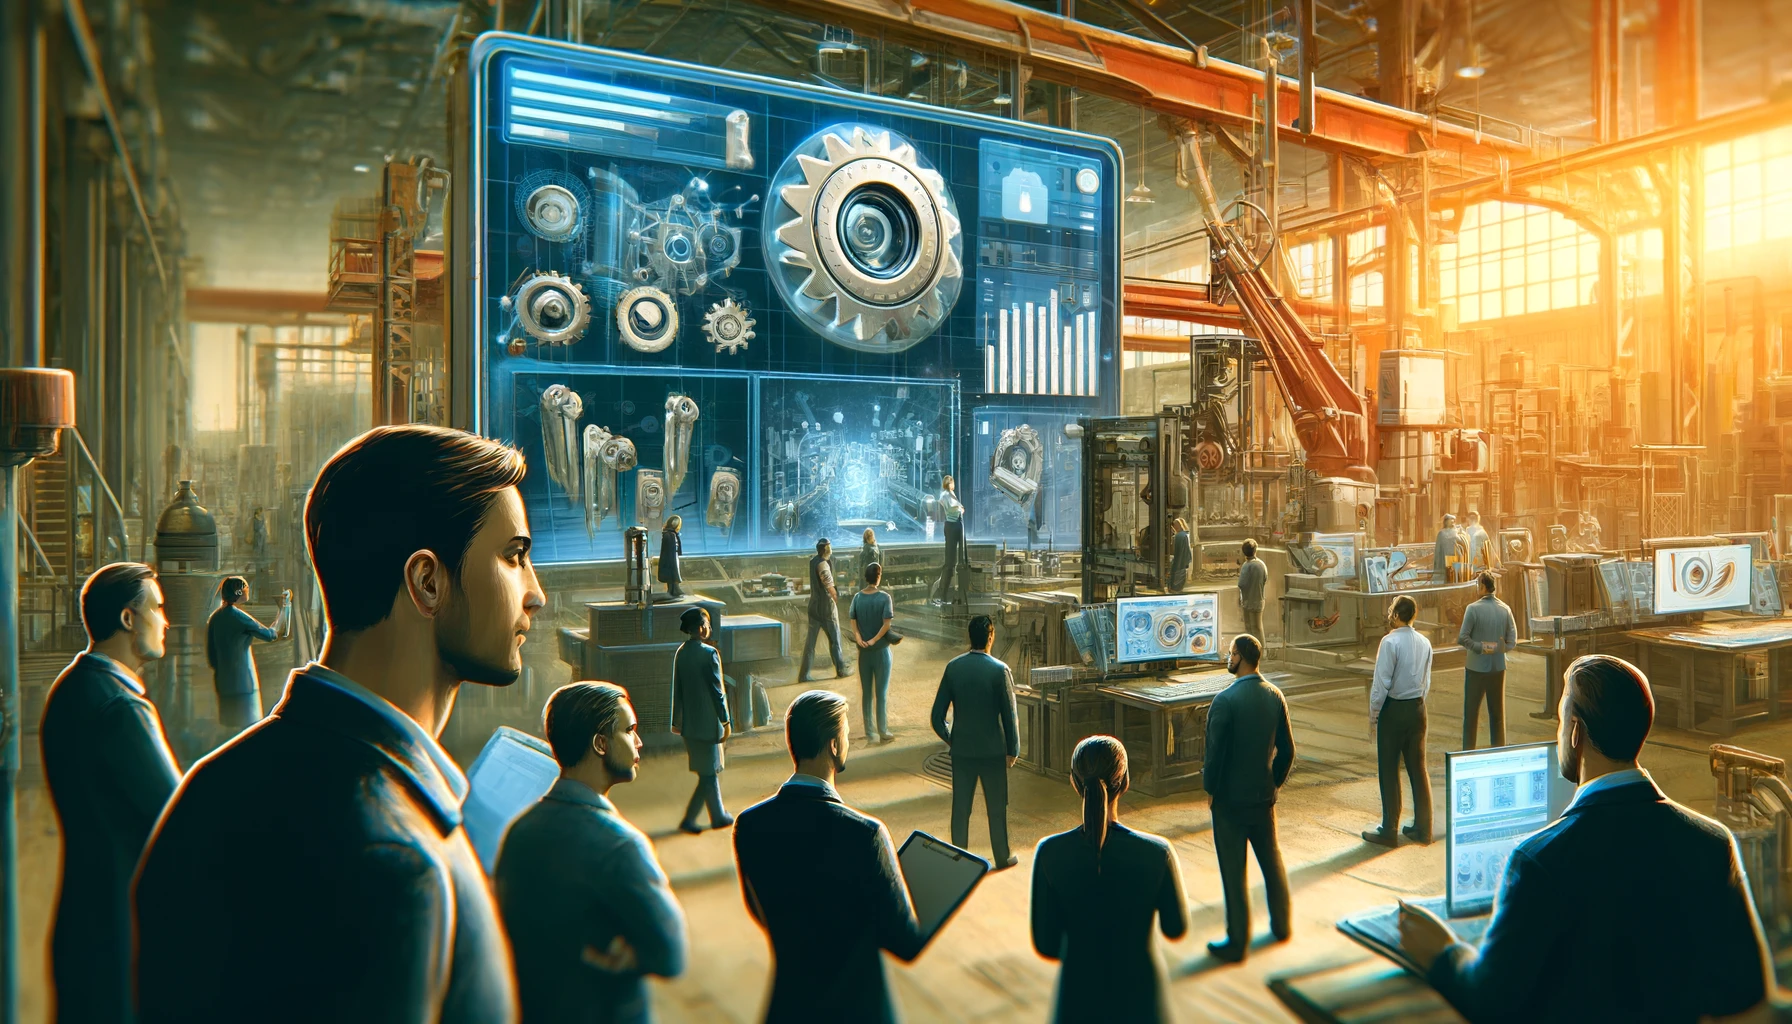 Here's the refined illustration for the article about the manufacturing company's use of an AI-powered visual inspection system. The scene focuses on a few main characters in an industrial setting, engaging with AI interfaces. The composition highlights a balance of warm and cool tones, enhancing the modern, tech-driven atmosphere.